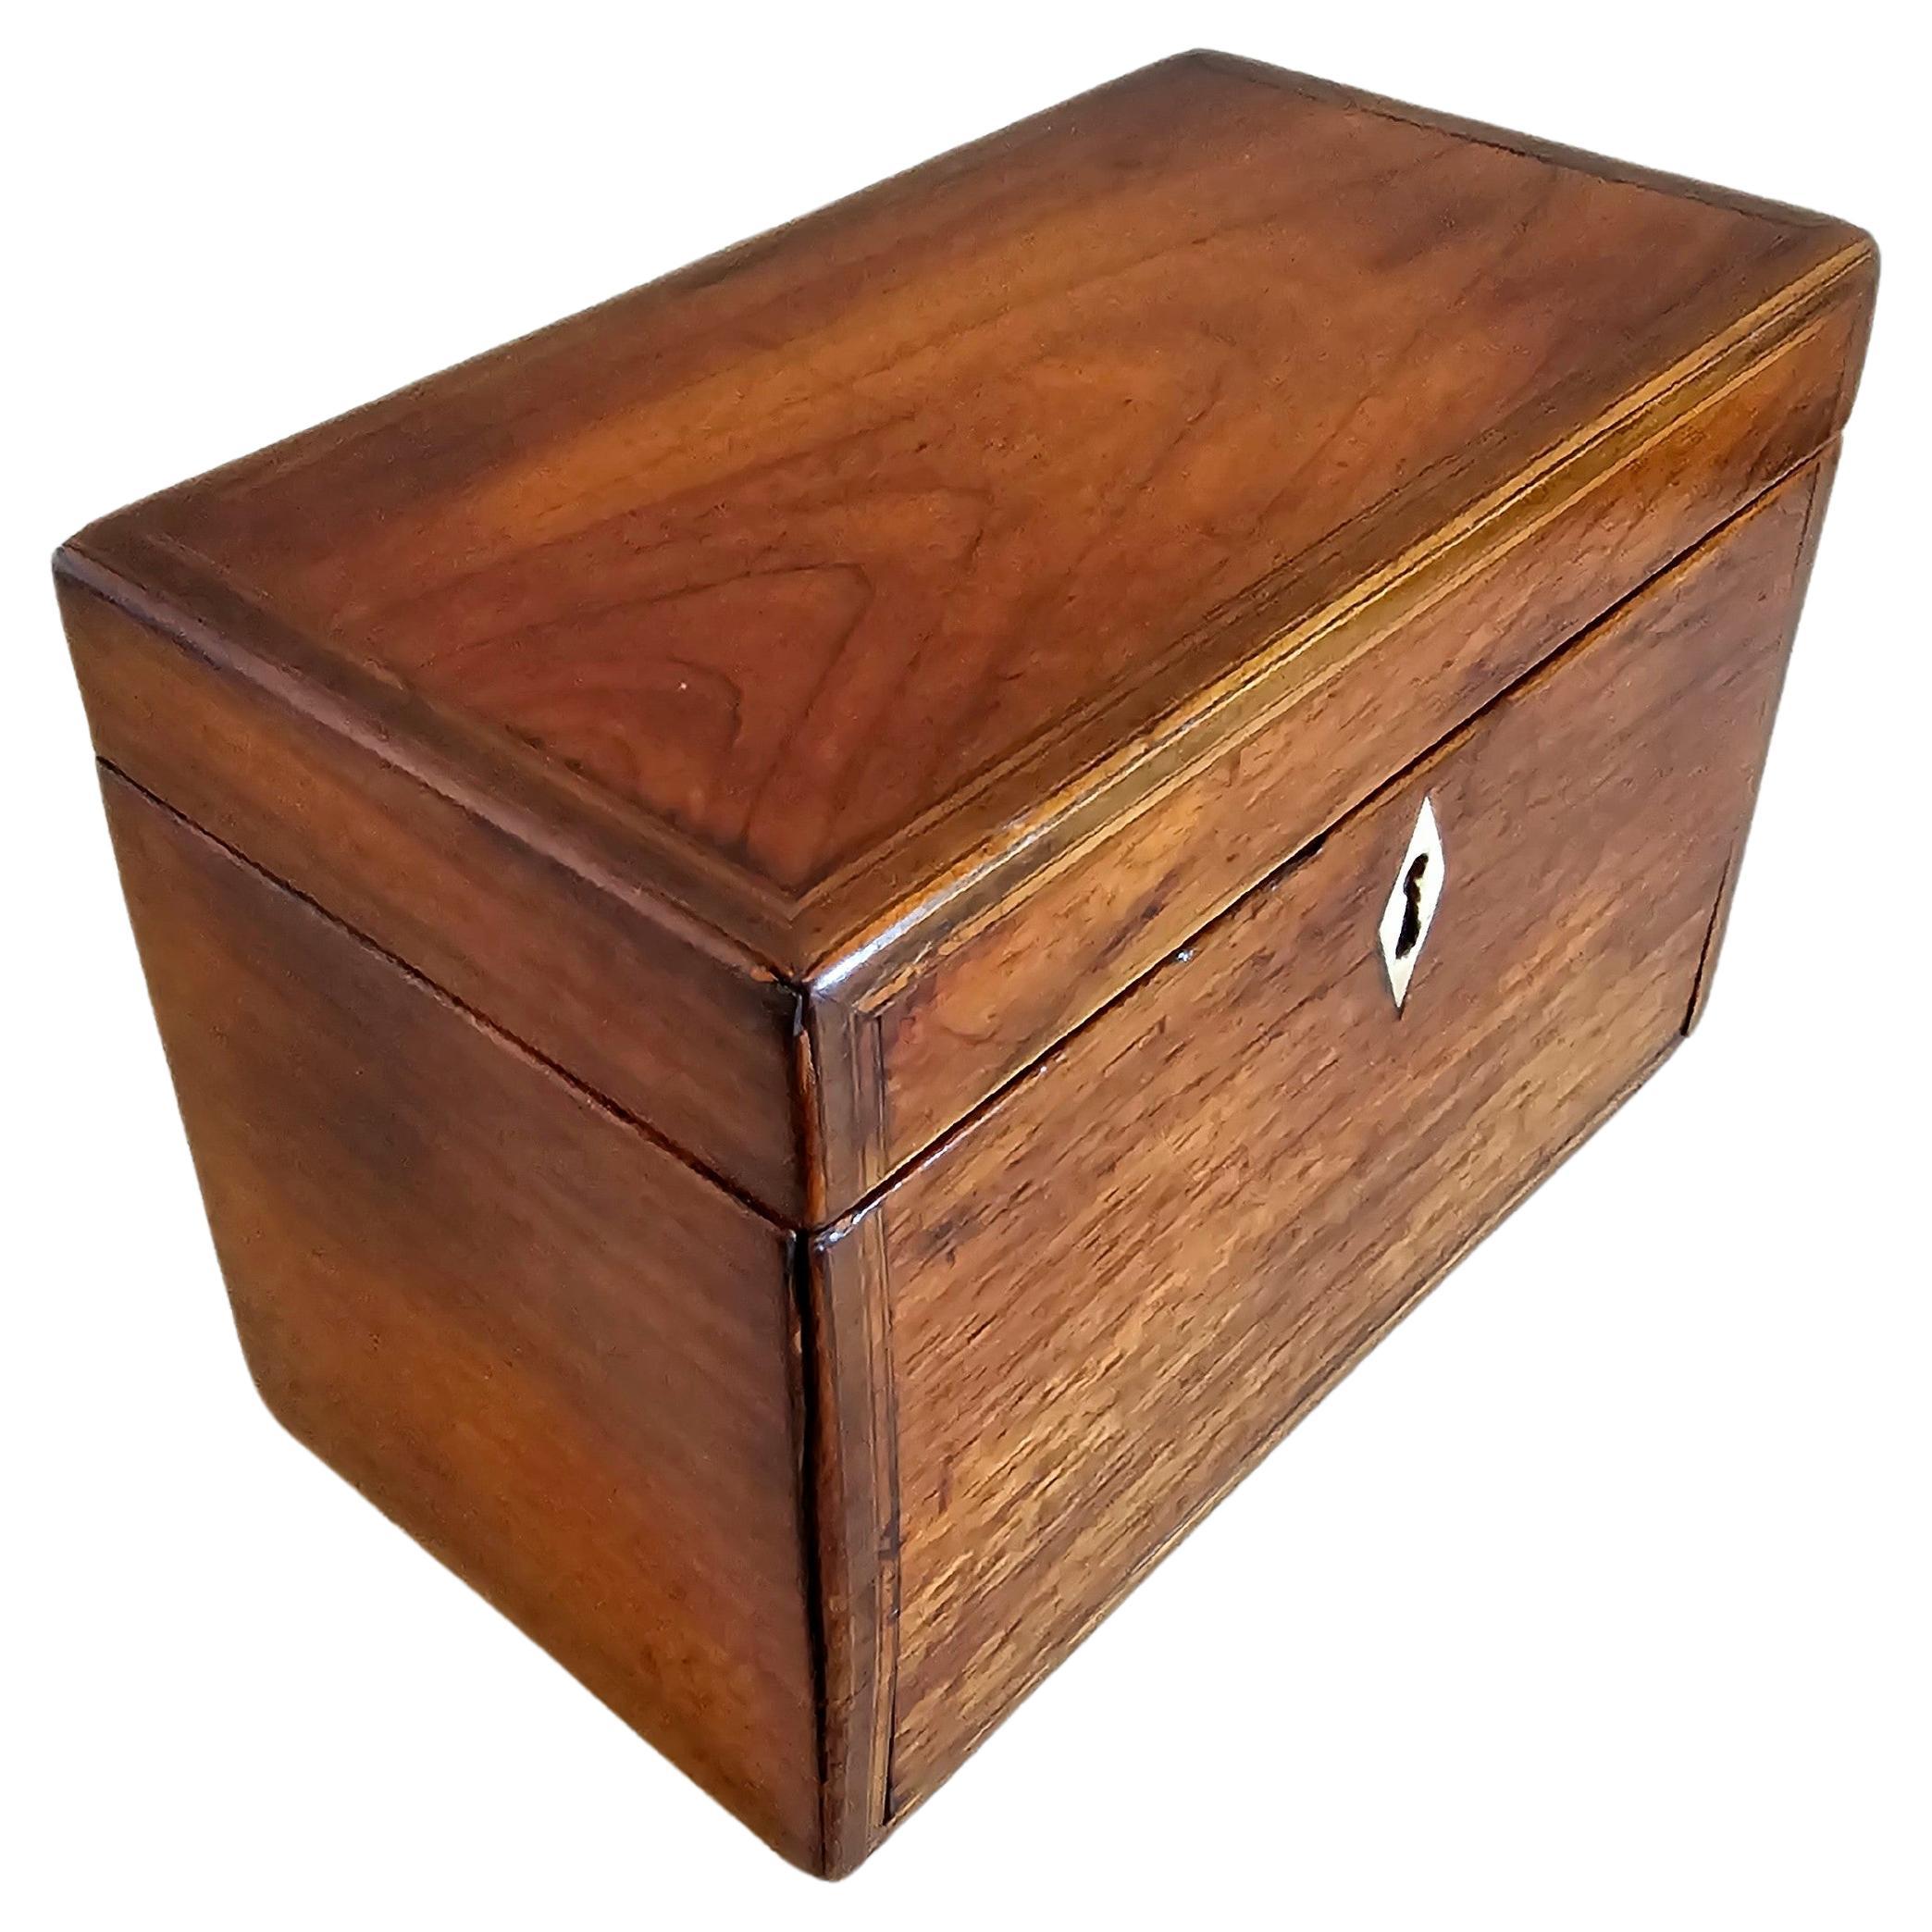 A charming period English George III (1760-1820) mahogany inlaid tea caddy. 

Tea was of exceptional value prior to the mid-19th century, plus the type of tea you could afford and the vessel you chose to store it in were seen as a great symbol of